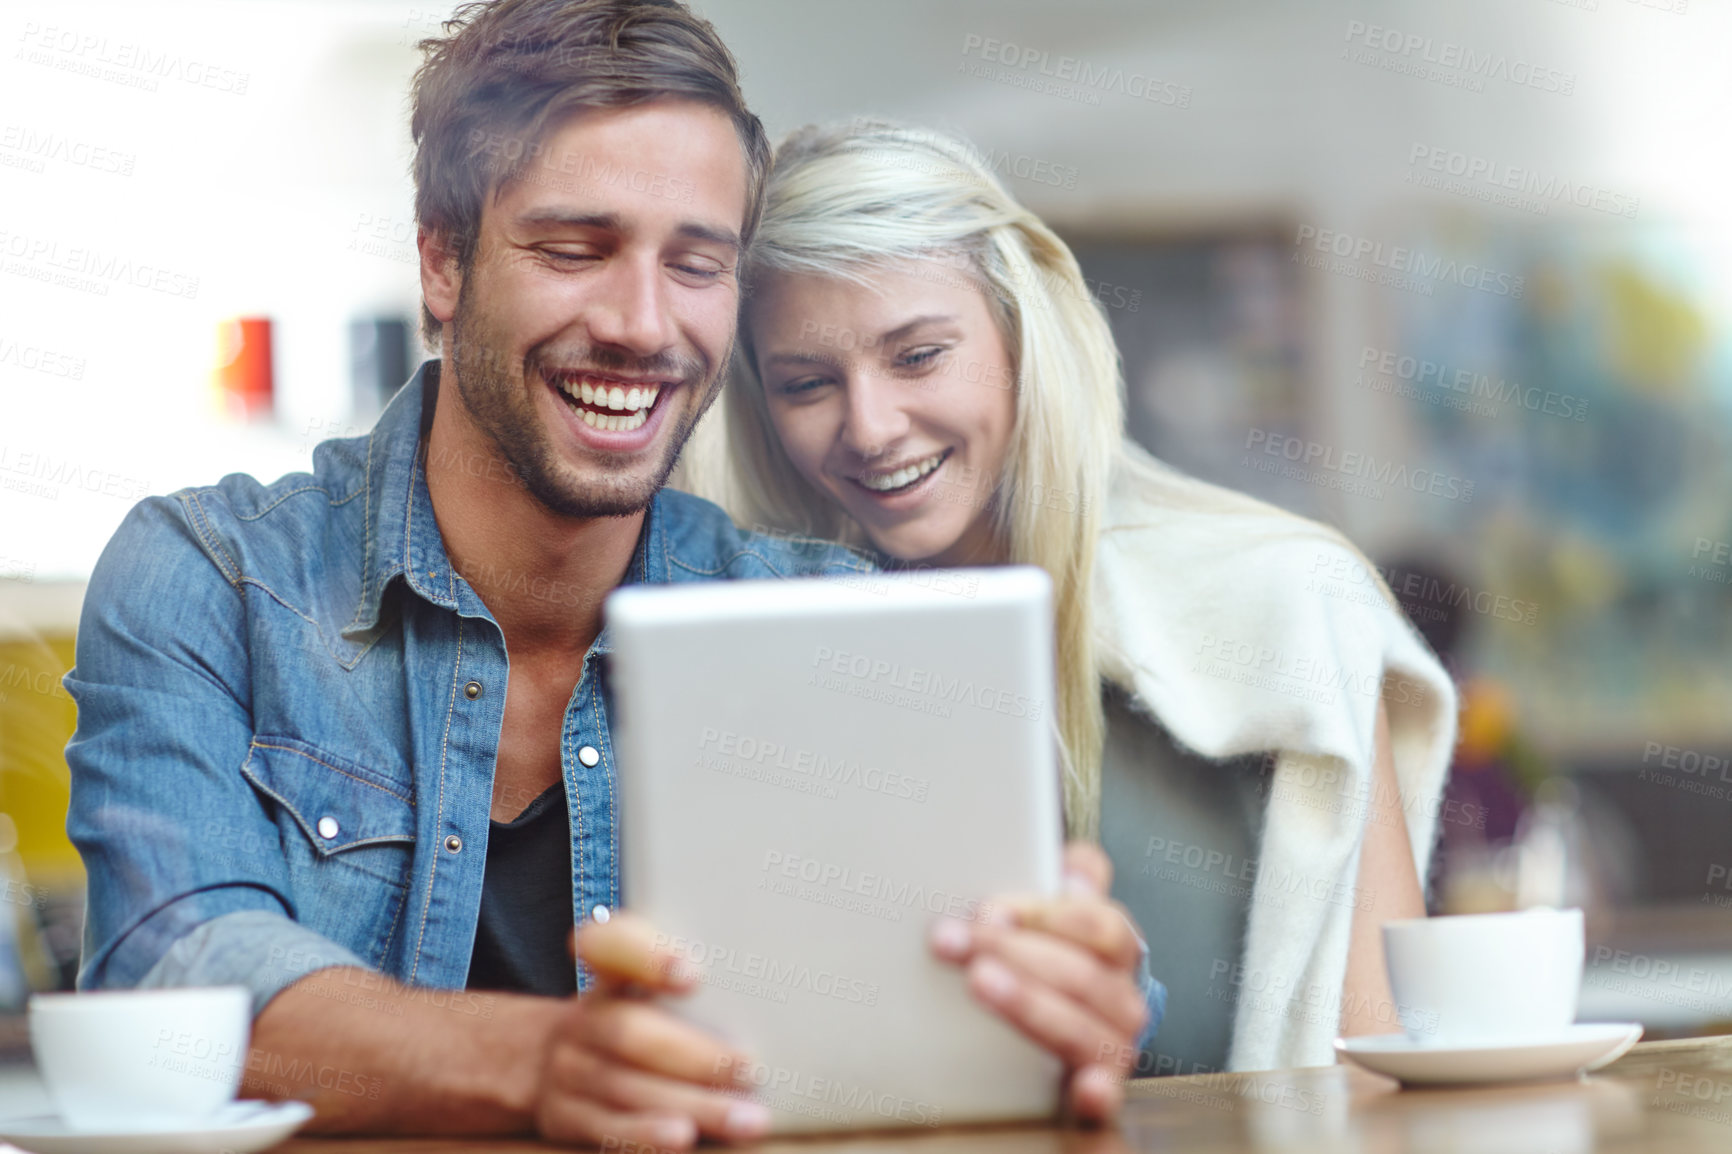 Buy stock photo Shot of a young couple laughing at someting on a tablet while on a coffee date